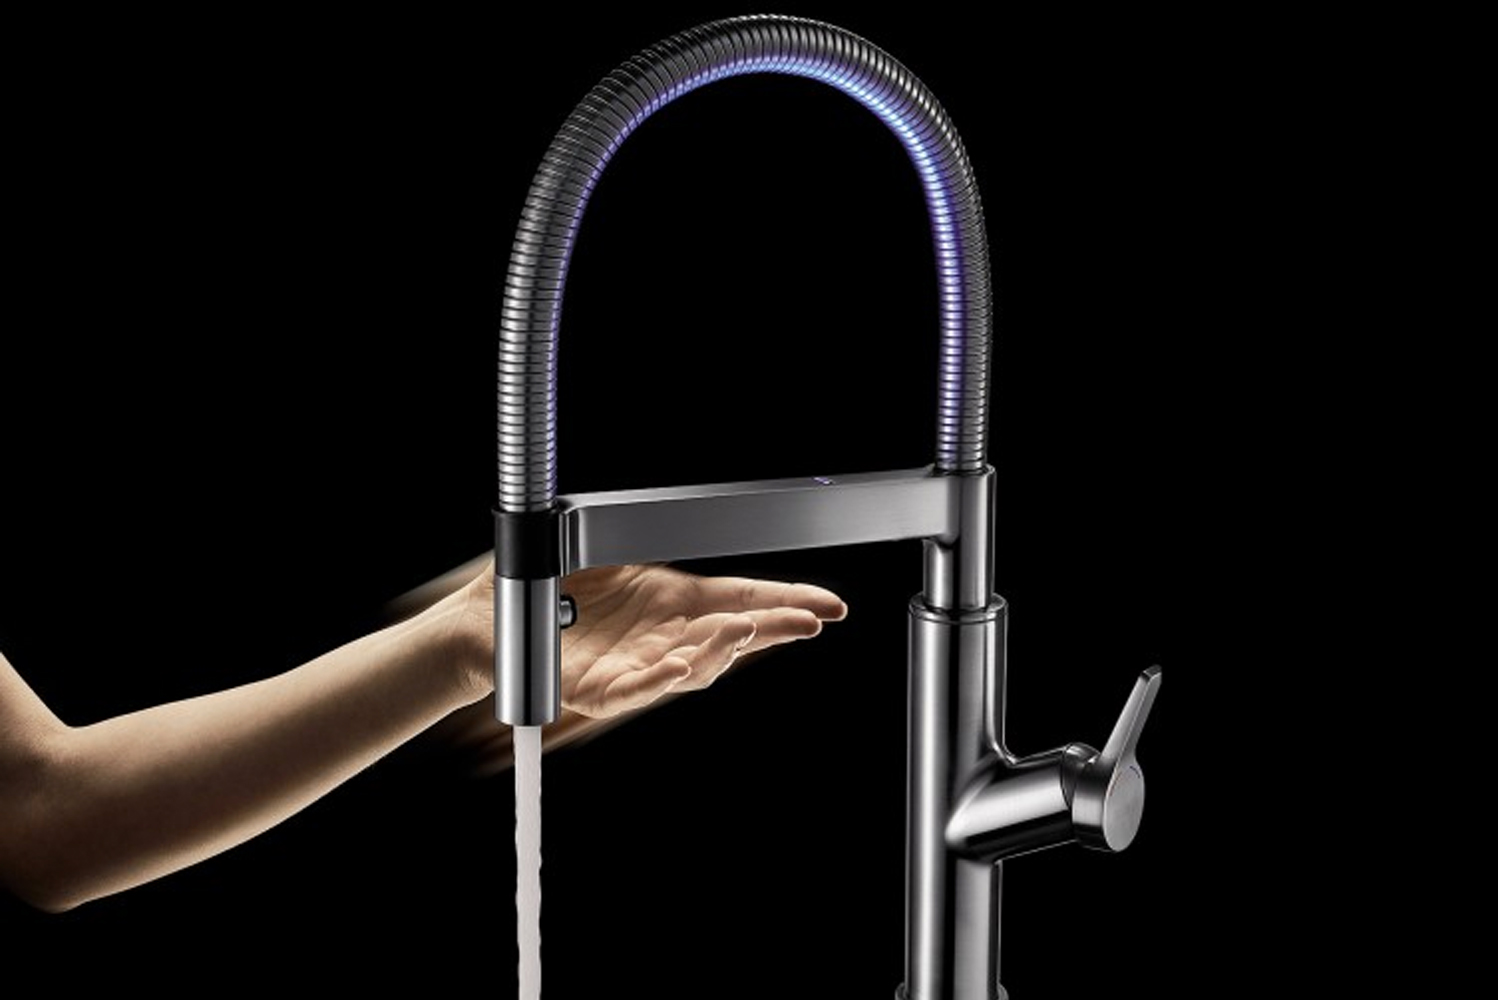 Solenta Senso is a faucet that responds with a simple passing wave 